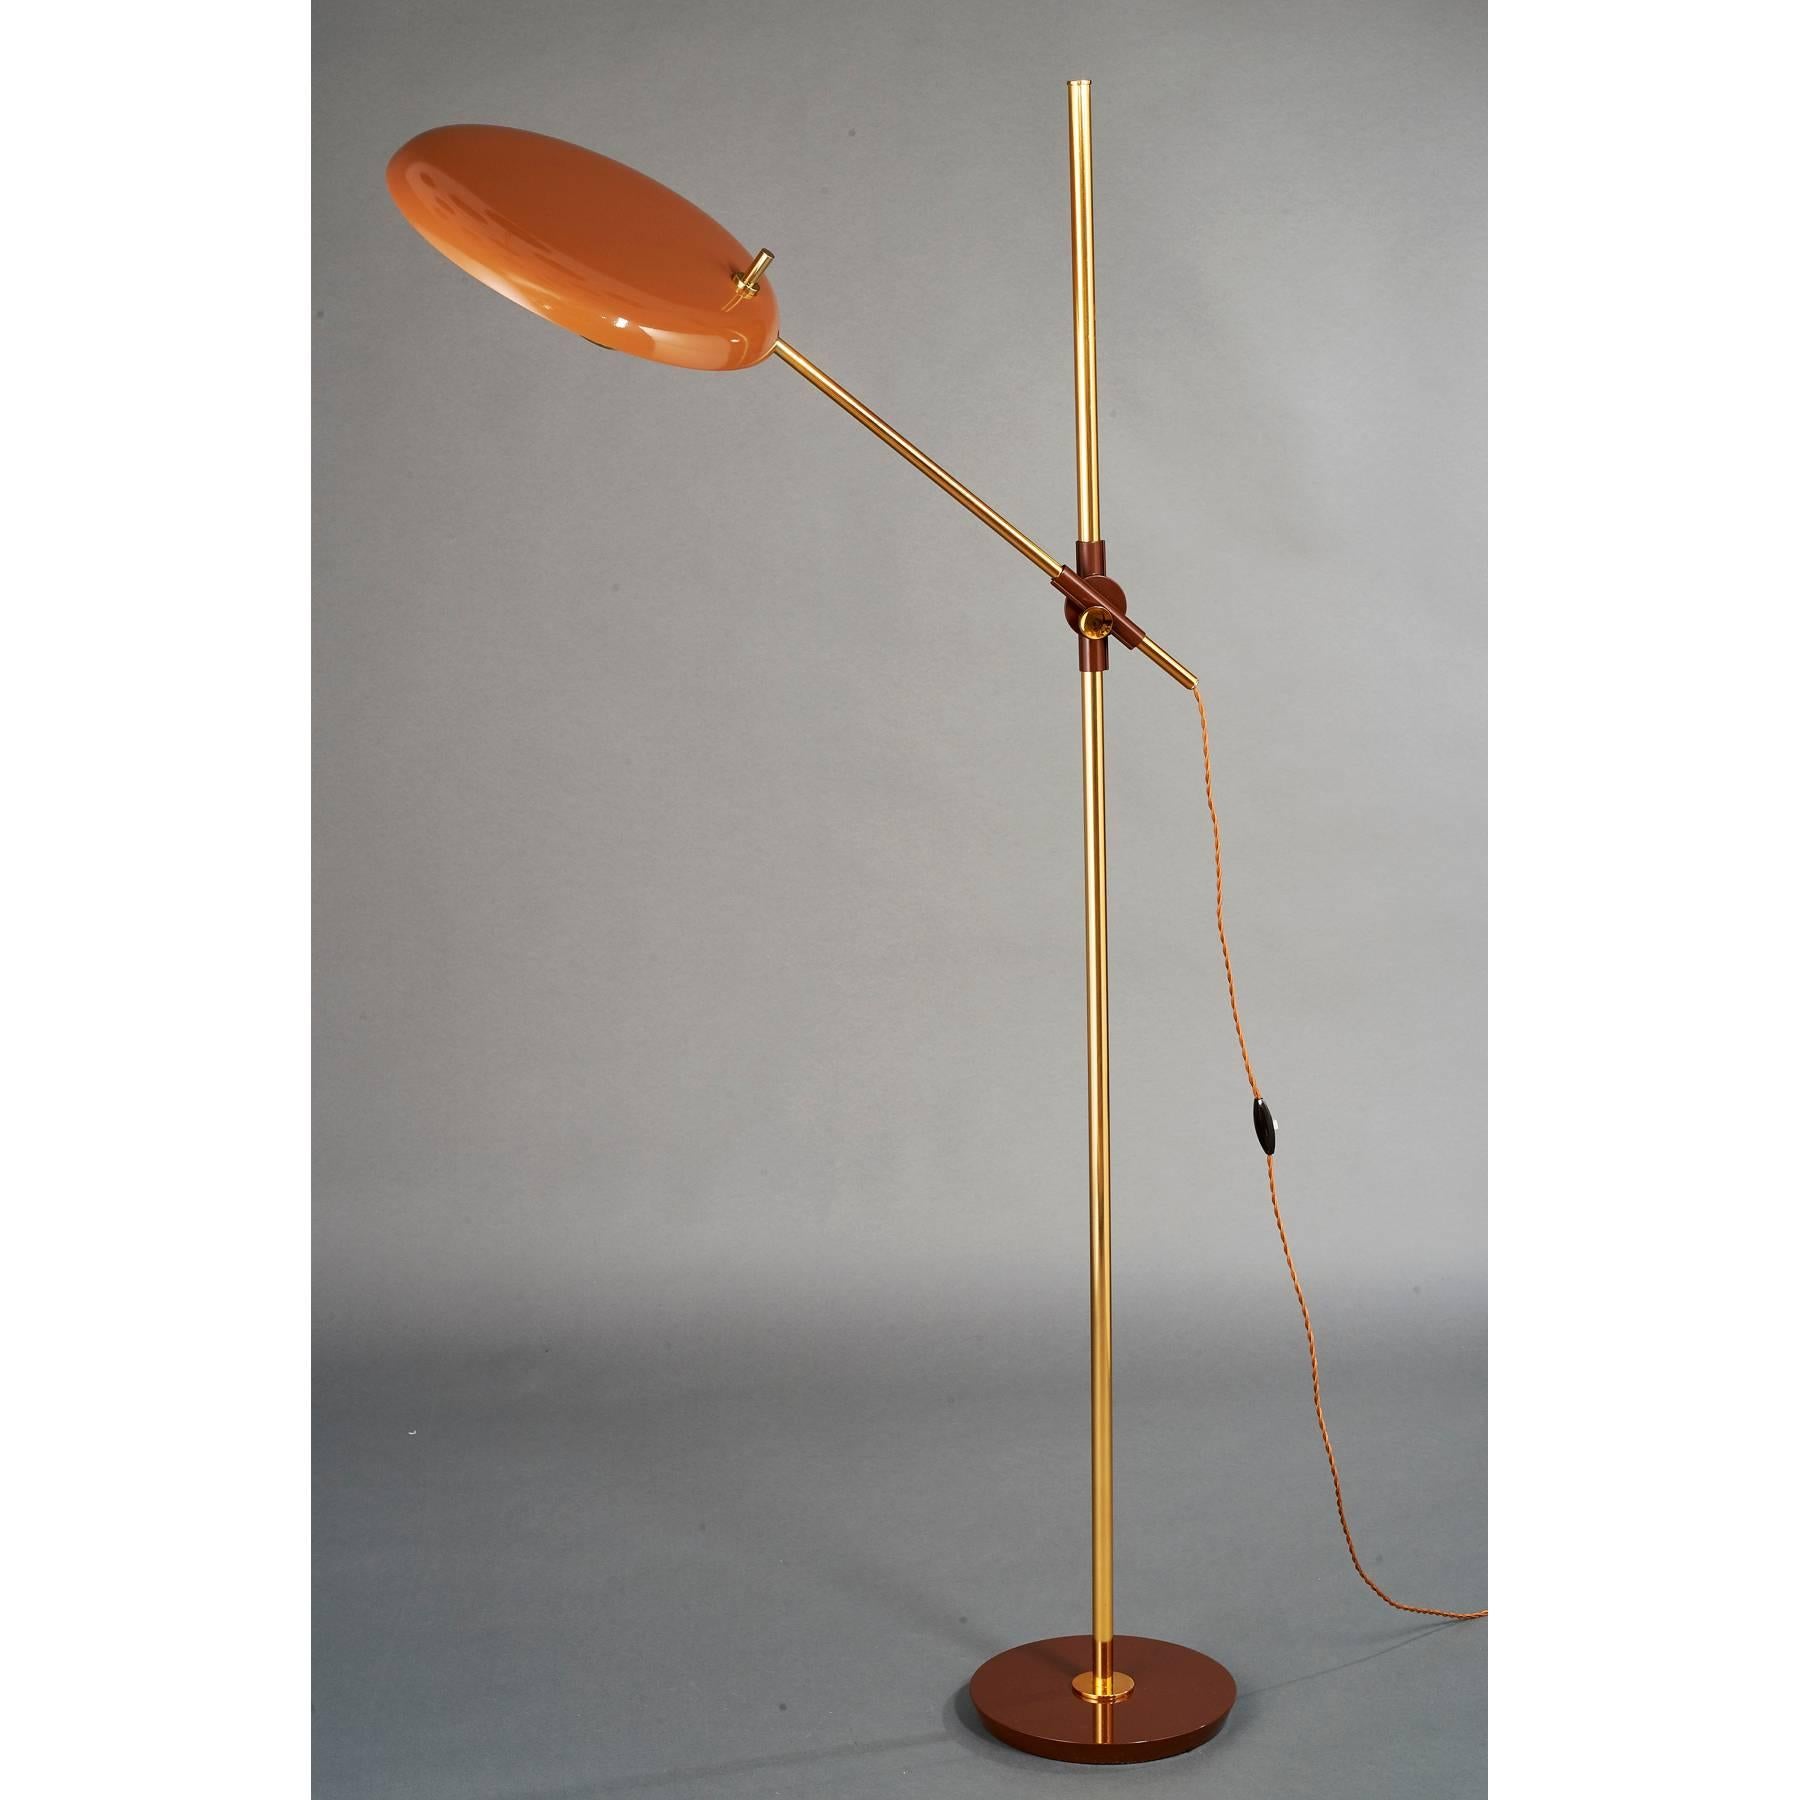 Adjustable brass floor lamp by Oscar Torlasco for Lumi, with enameled metal shade and base and magnifying glass lens.
Italy, 1950s
Makes for a wonderful reading light.
Rewired for use in the USA with one standard base bulb
Dimensions: 61 H x 33